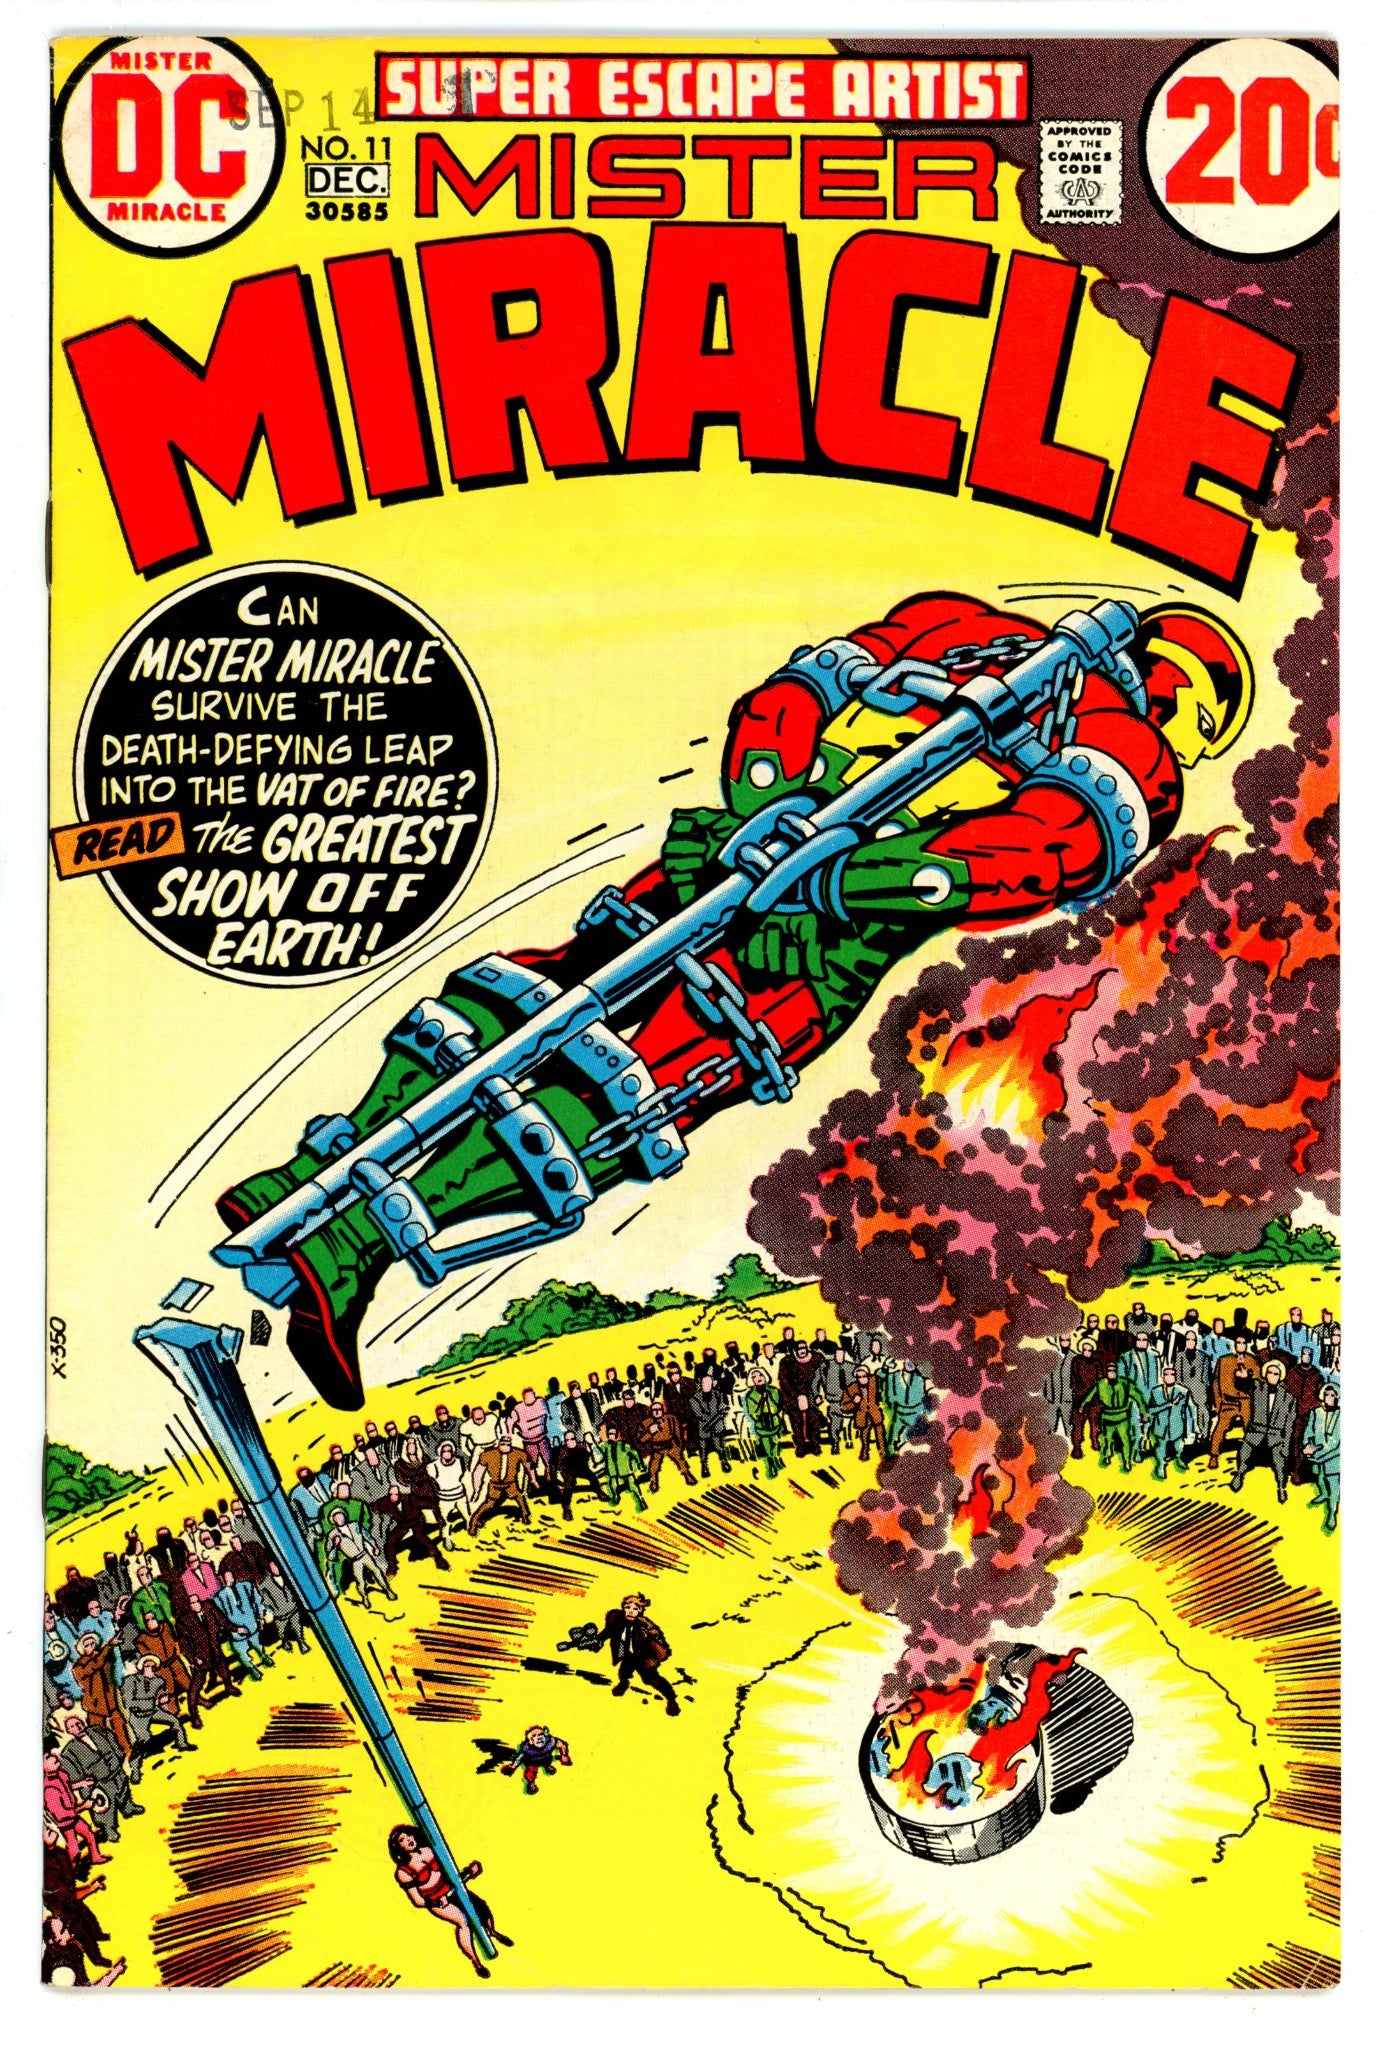 Mister Miracle Vol 1 11 FN (6.0) (1972) 